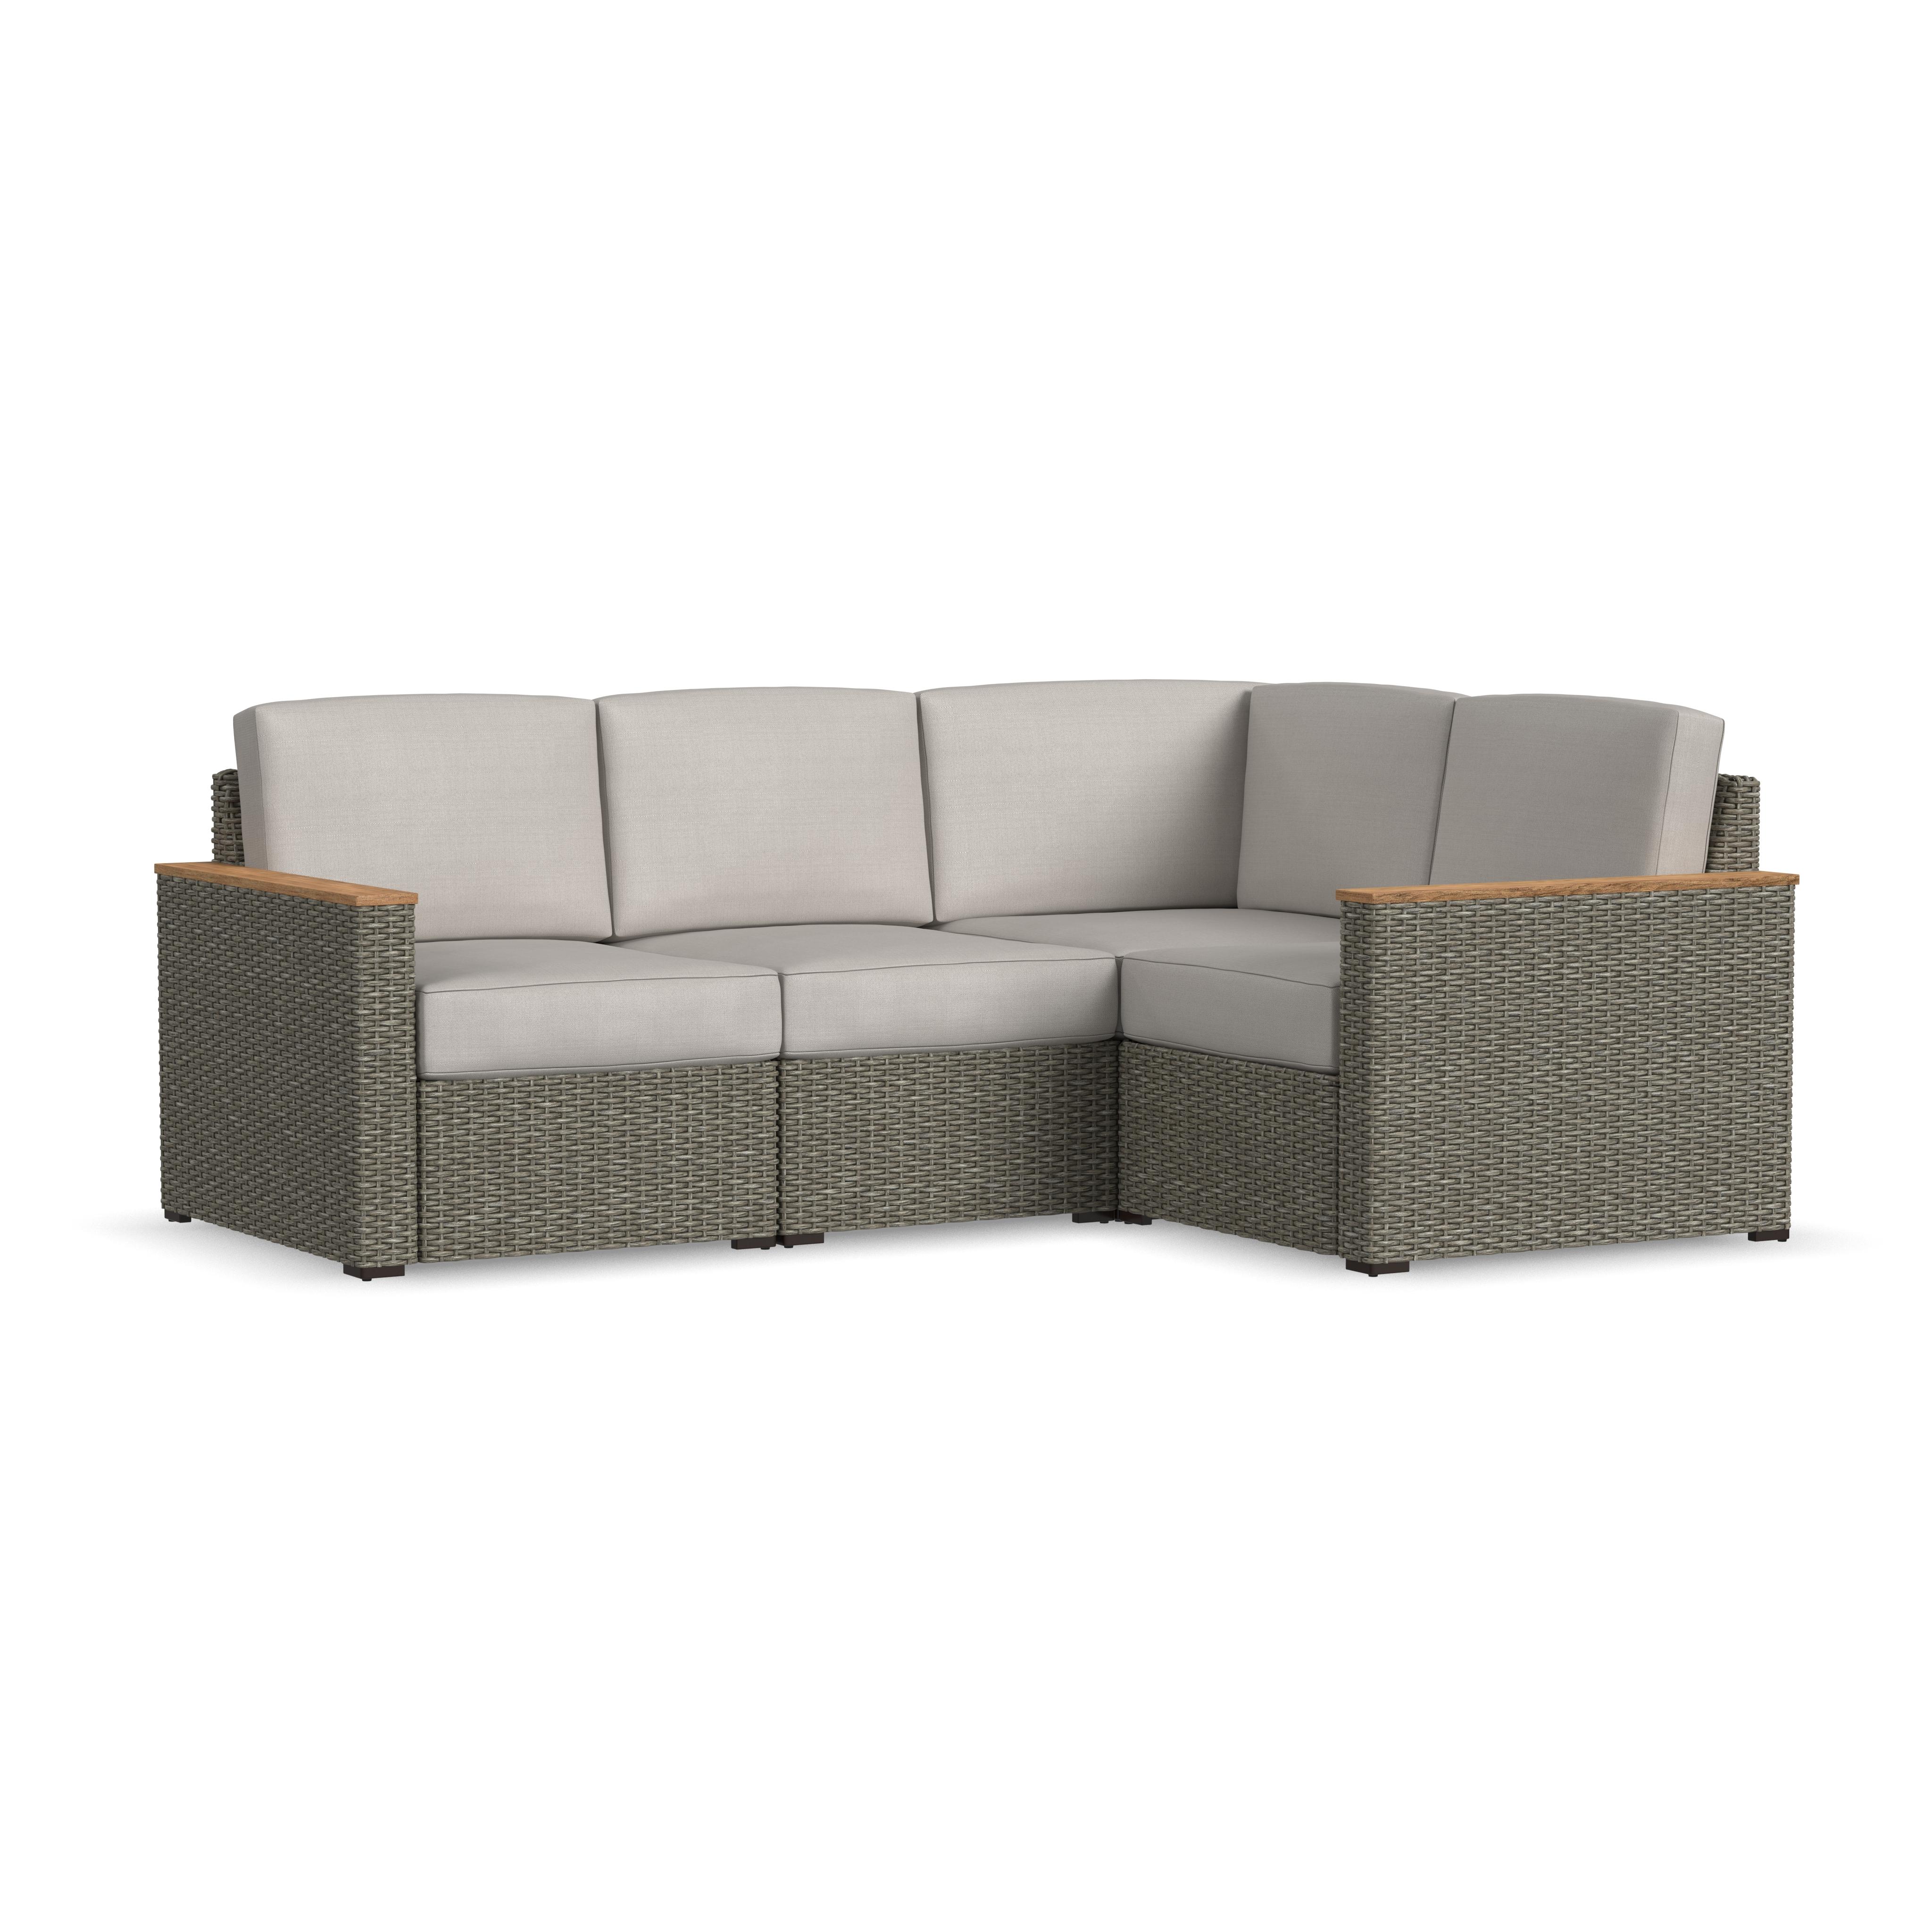 Homestyles Boca Raton Outdoor 4 Seat Sectional